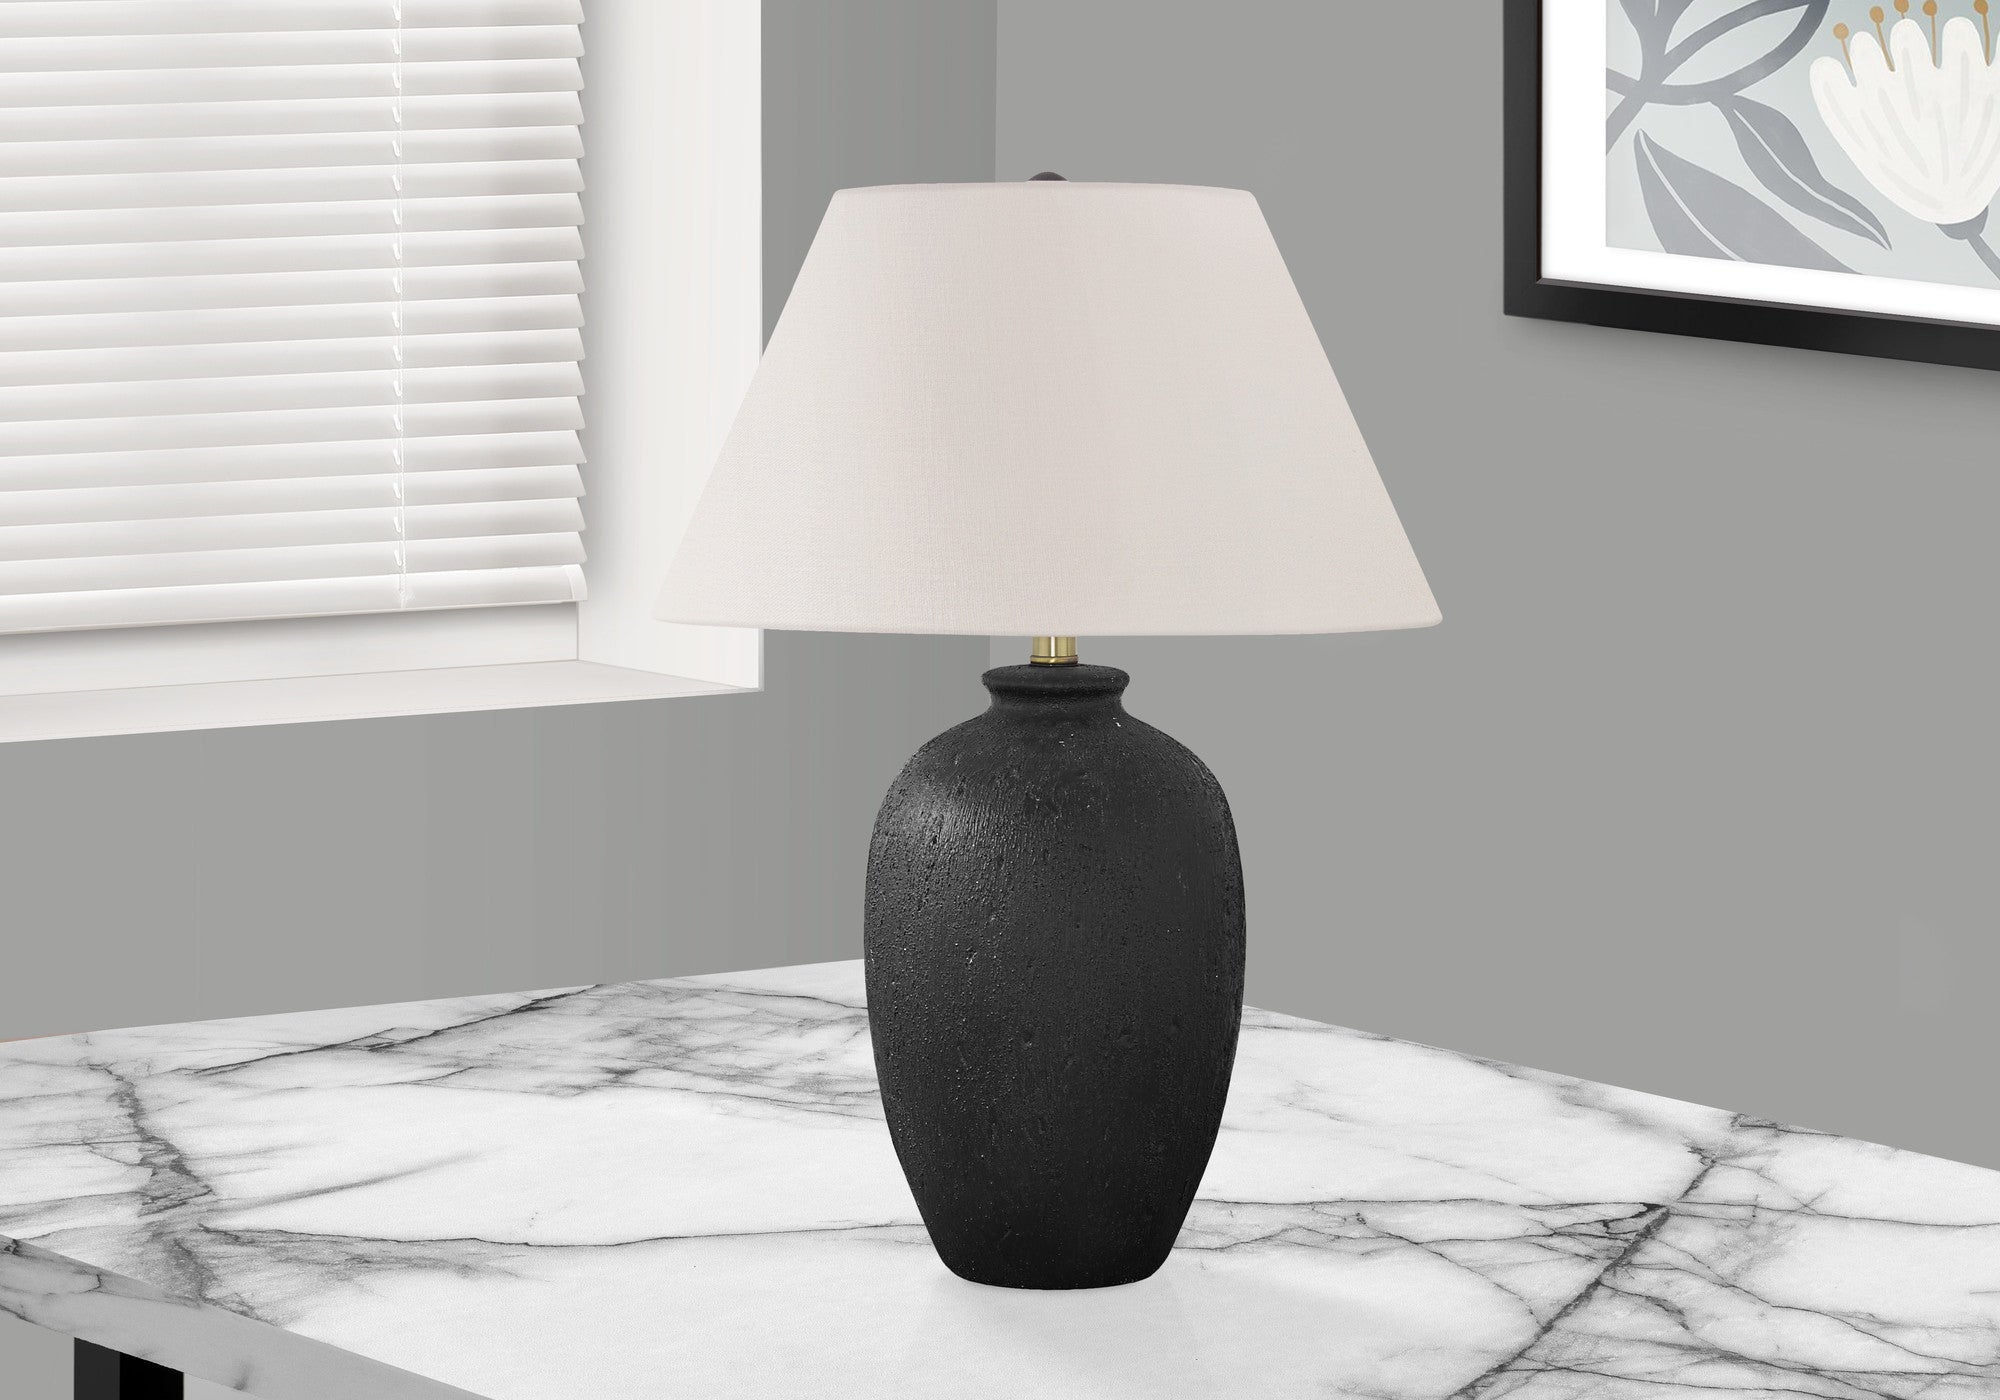 24" Black Ceramic Round Table Lamp With Ivory Empire Shade